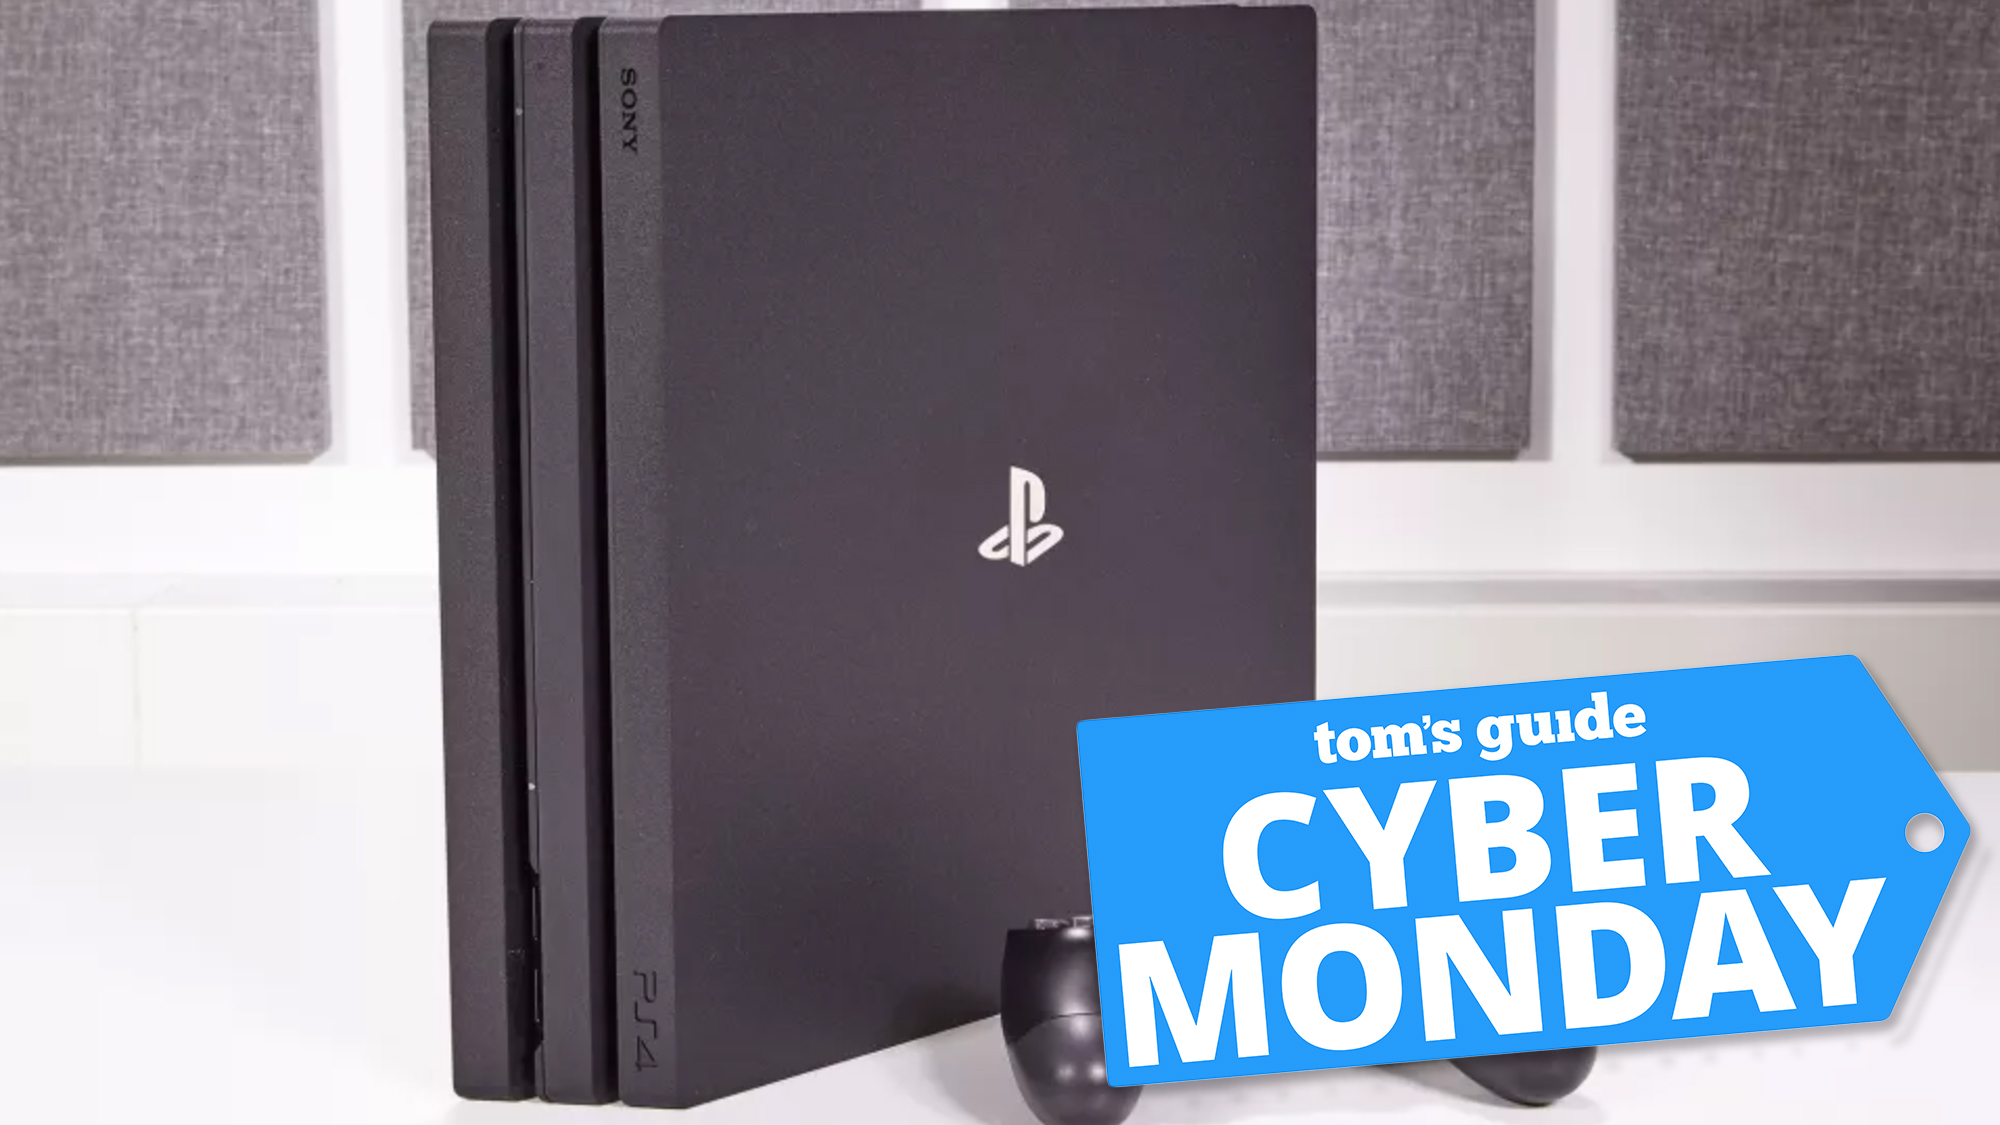 cyber monday deals 2019 playstation 4